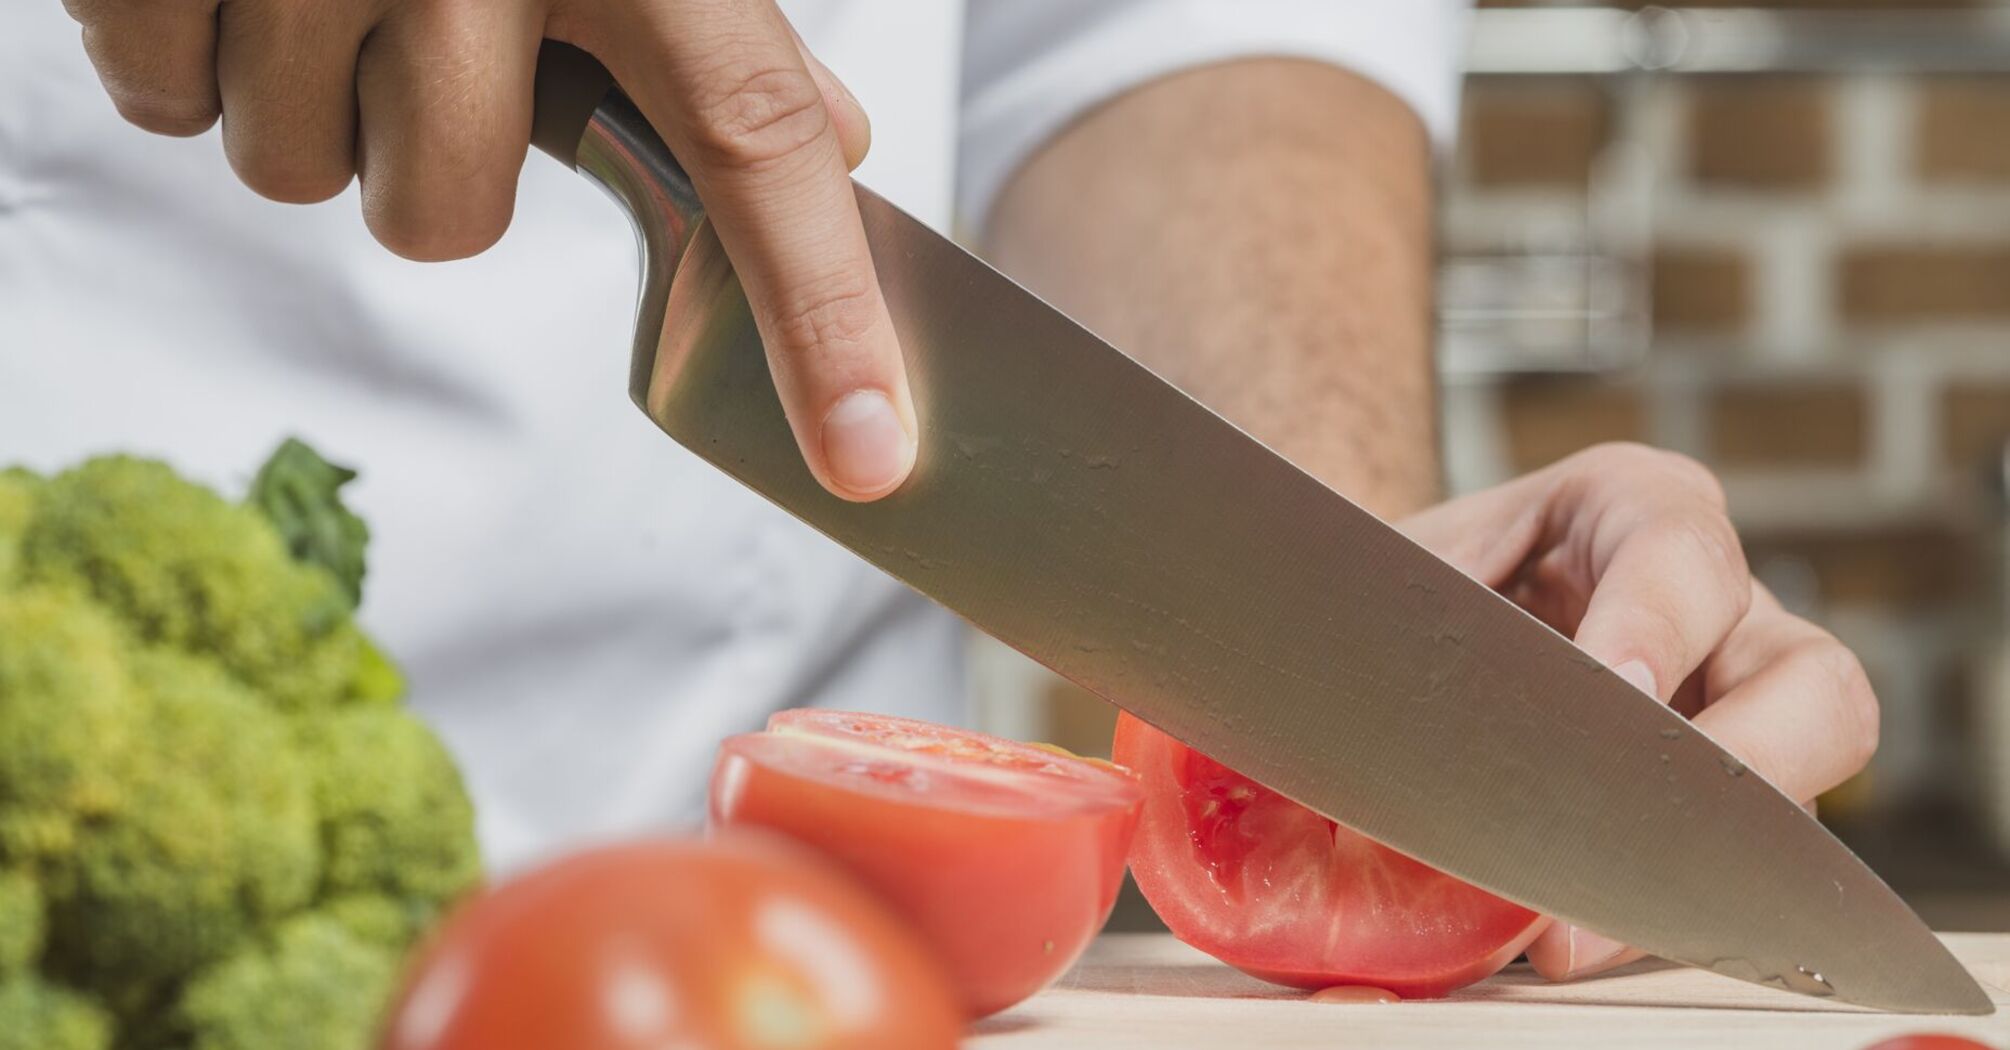 Maintaining the sharpness of the knife